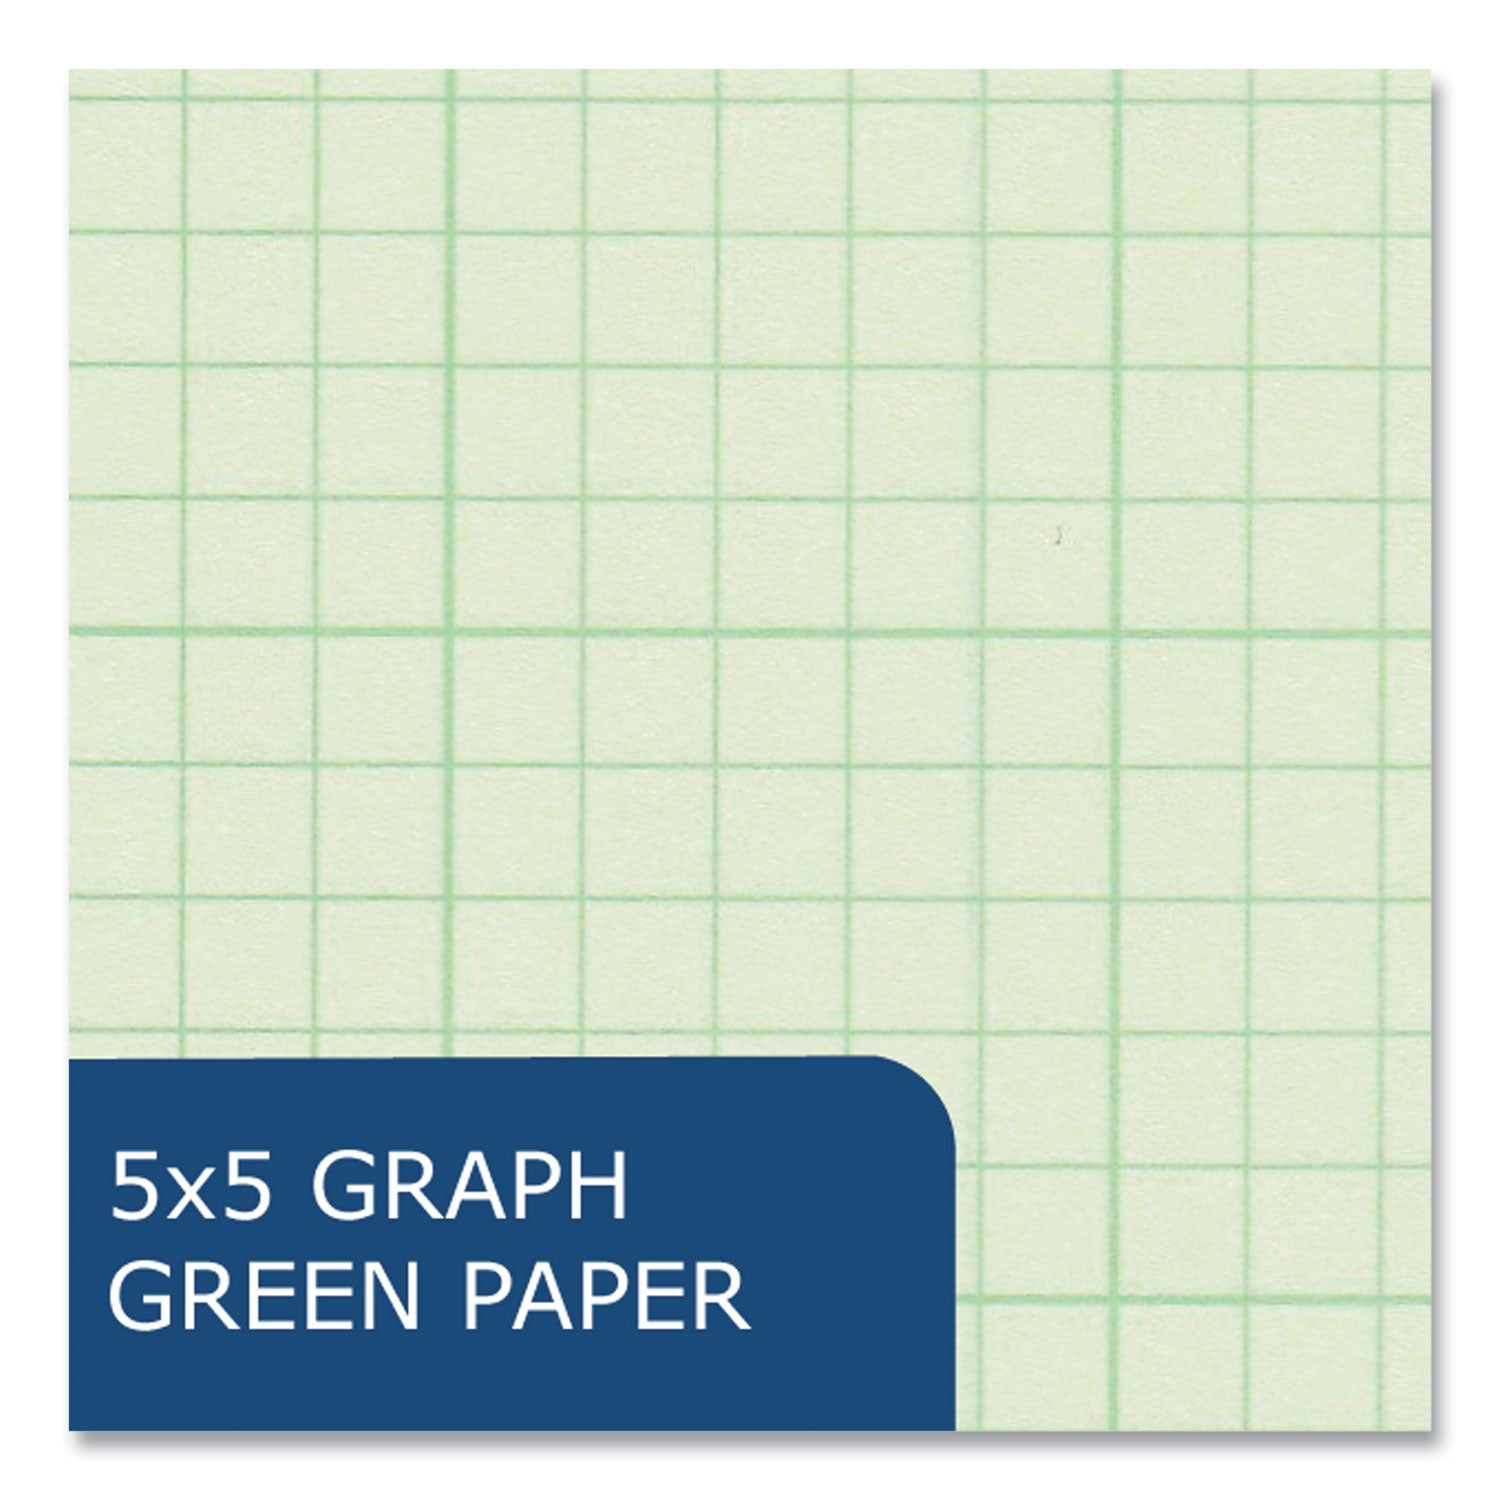 engineer-filler-paper-3-hole-frame-format-quad-rule-5-sq-in-1-sq-in-500-sheets-pk-5-carton-ships-in-4-6-business-days_roa95782cs - 4